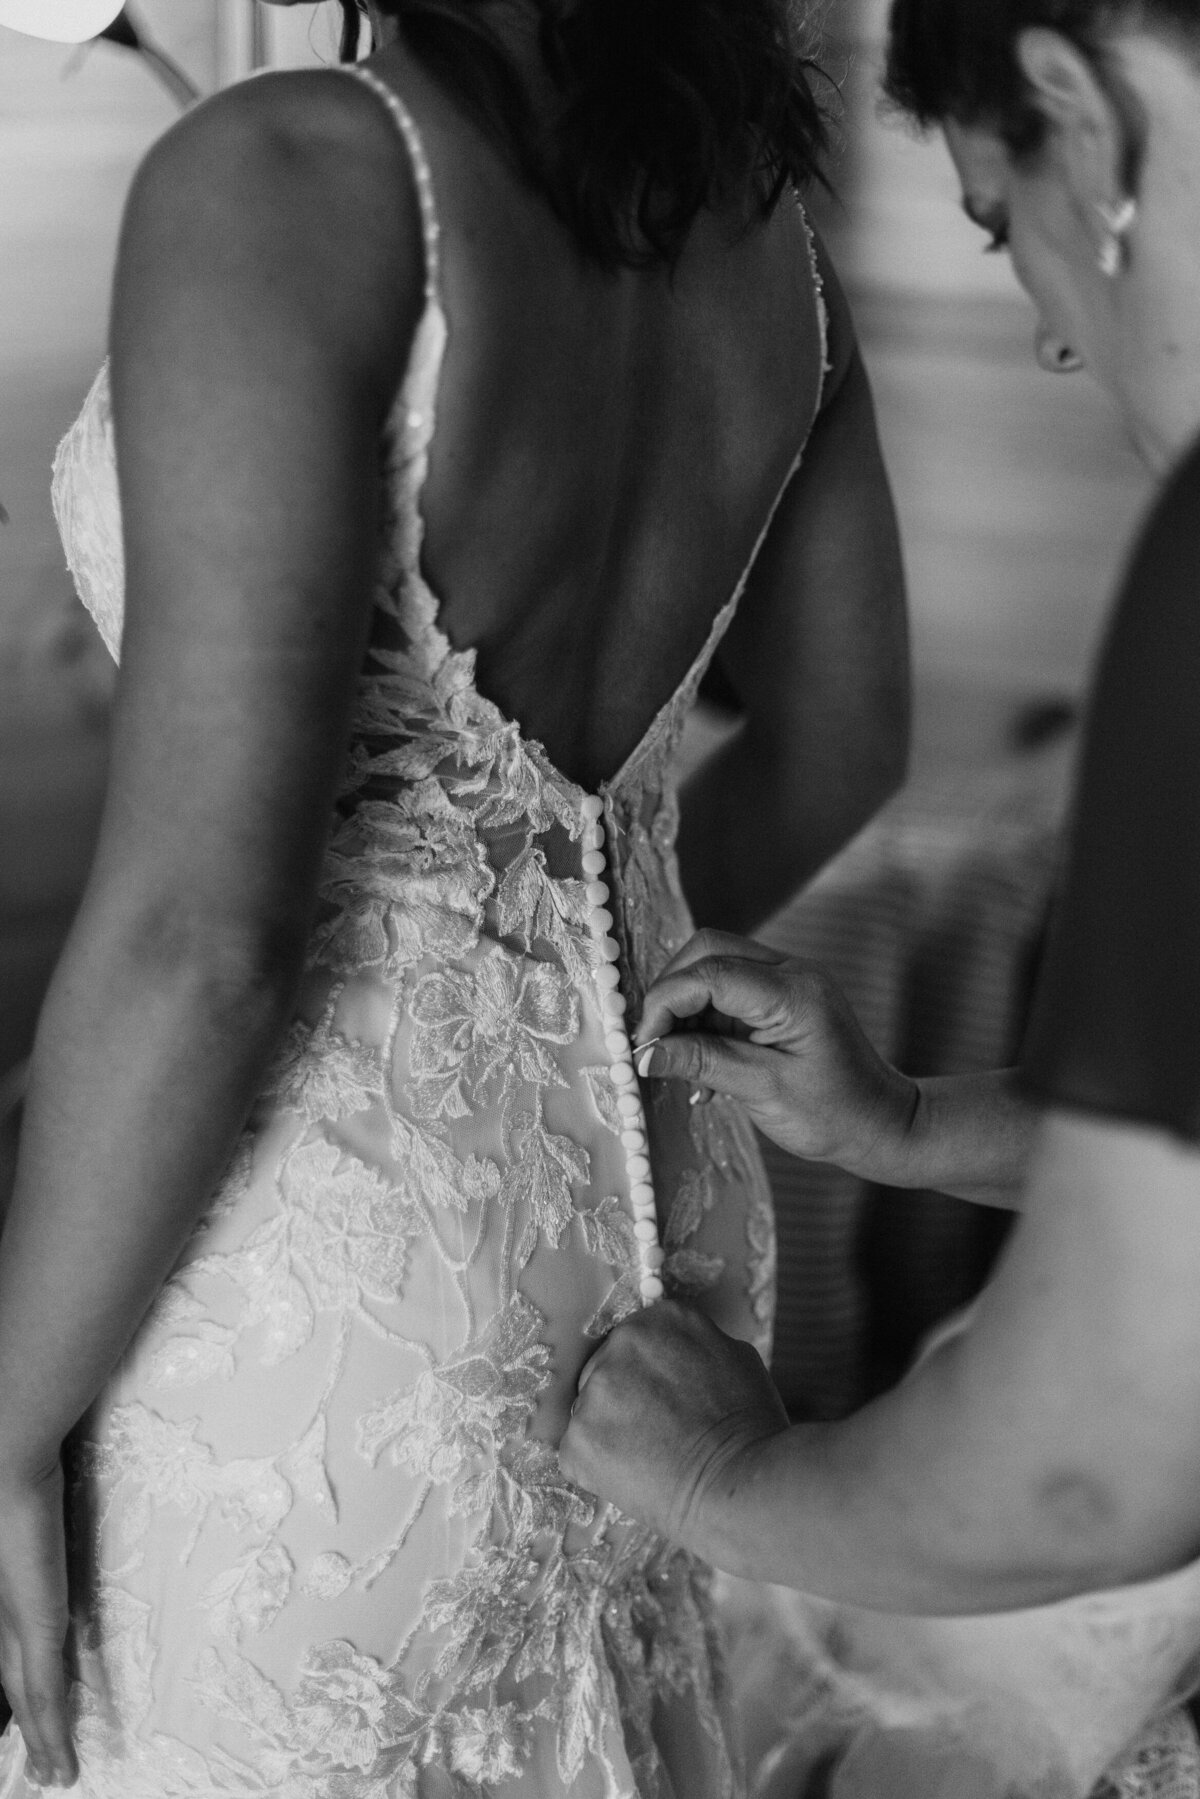 person zipping up the back of a bride's wedding dress